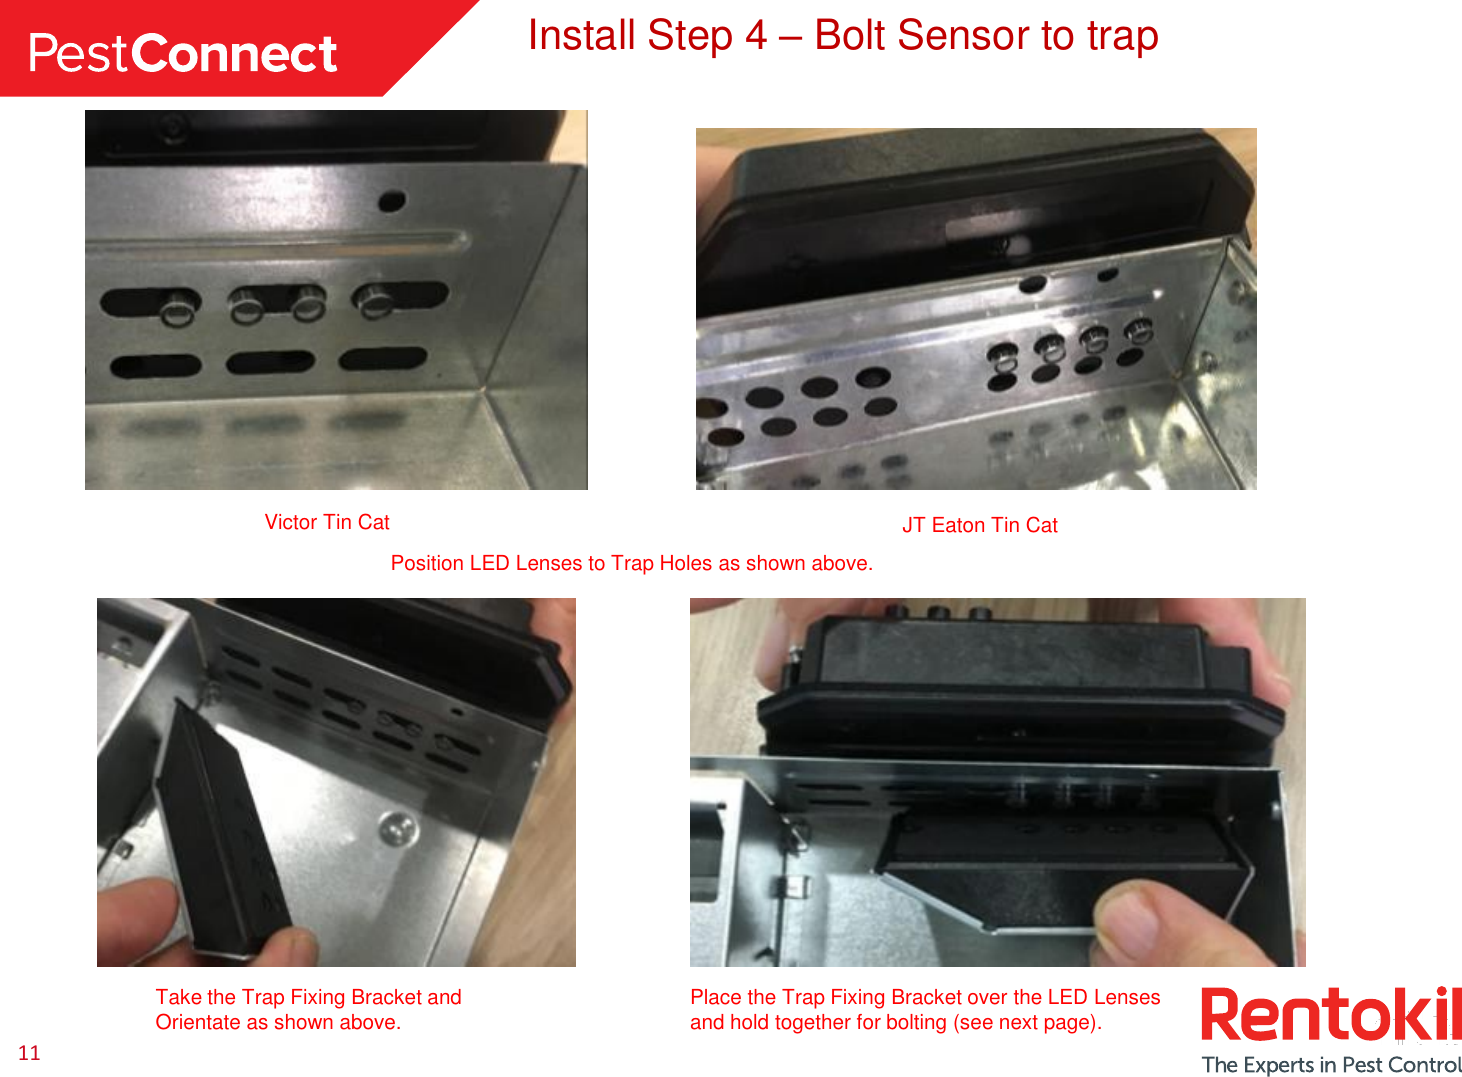 11Install Step 4 –Bolt Sensor to trapPosition LED Lenses to Trap Holes as shown above.Take the Trap Fixing Bracket and Orientate as shown above. Place the Trap Fixing Bracket over the LED Lenses and hold together for bolting (see next page).JT Eaton Tin CatVictor Tin Cat